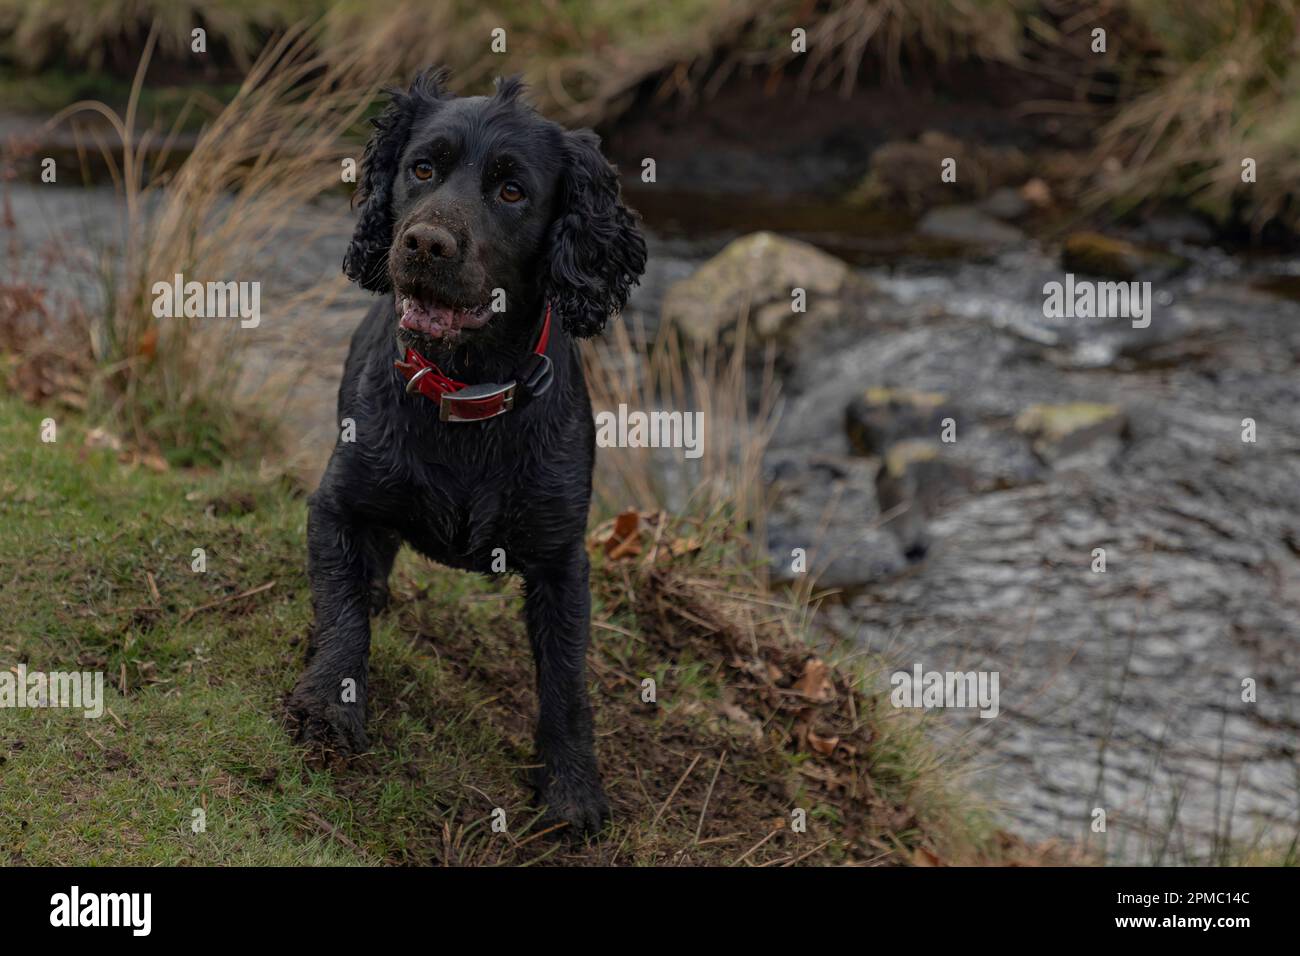 Black working cocker spaniel stood by a stream wearing a red collar and with his nose covered in soil Stock Photo